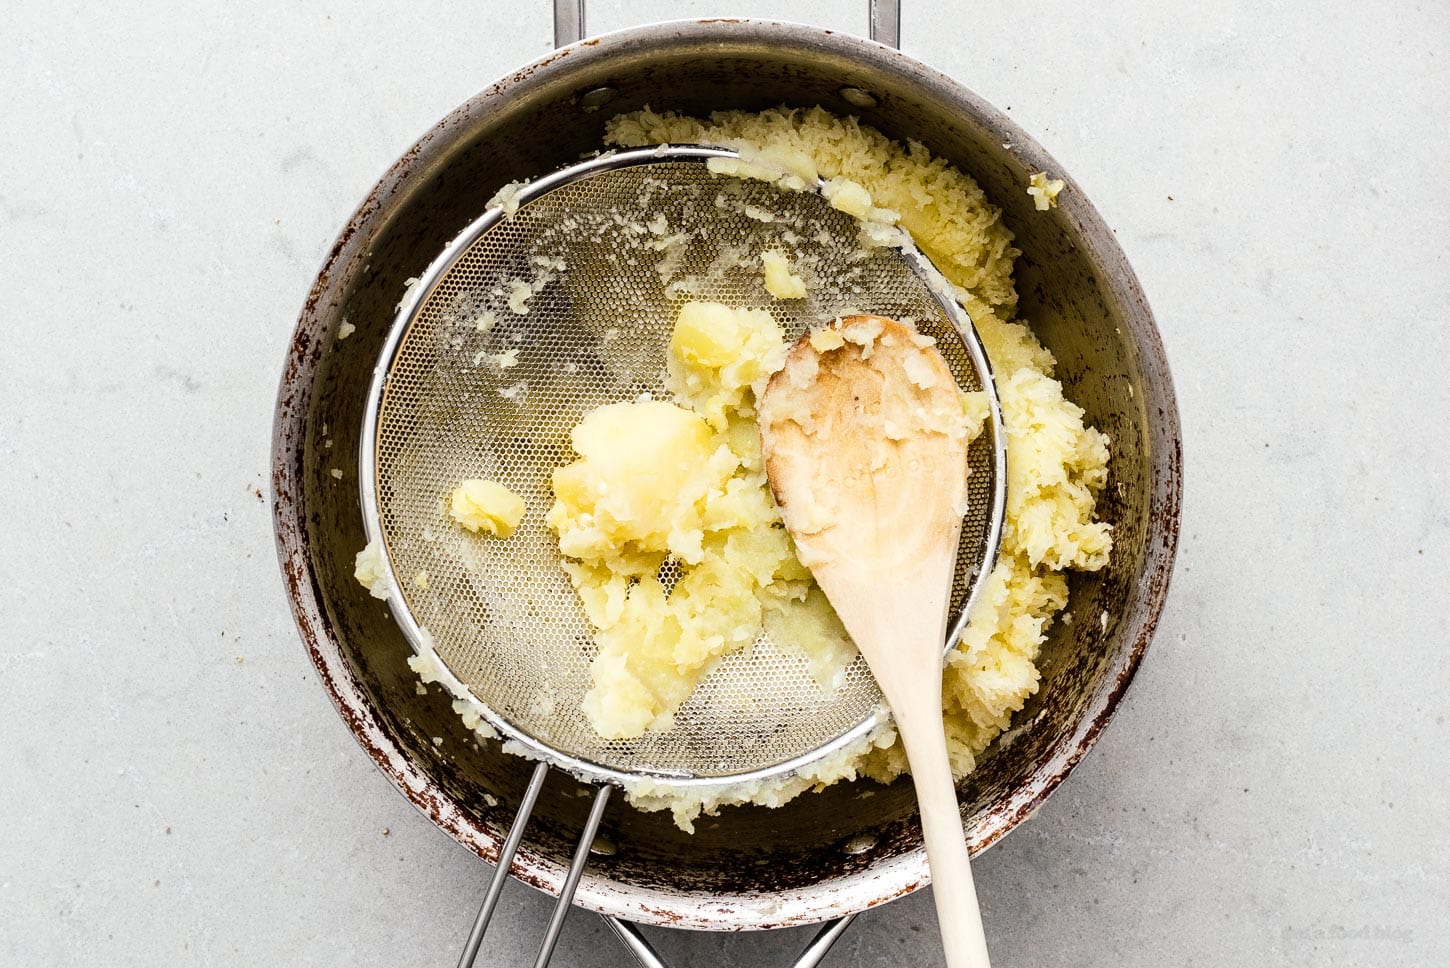 mashed potatoes with strainer | www.http://elcomensal.es/